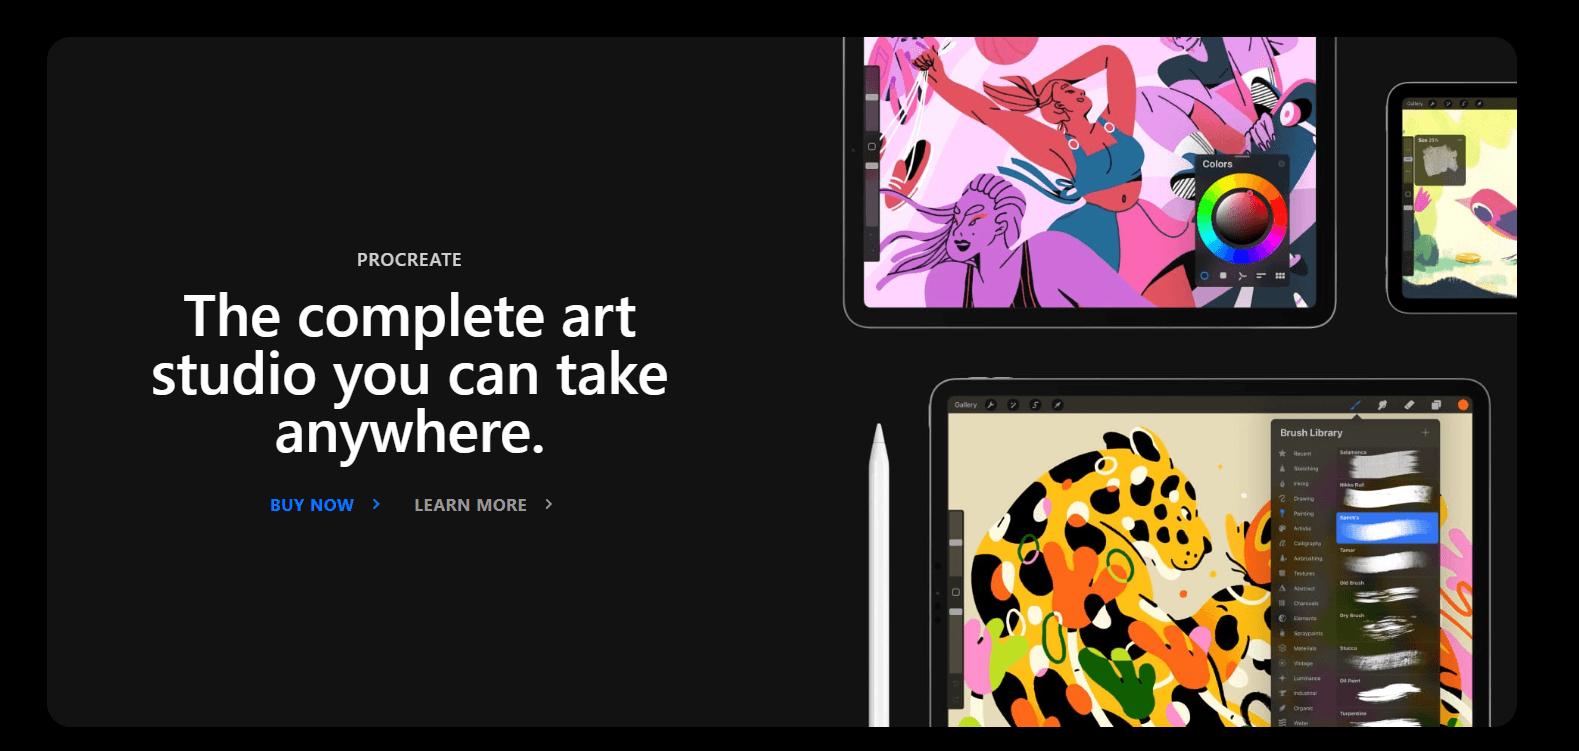 Procreate: The complete art studio you can take anywhere